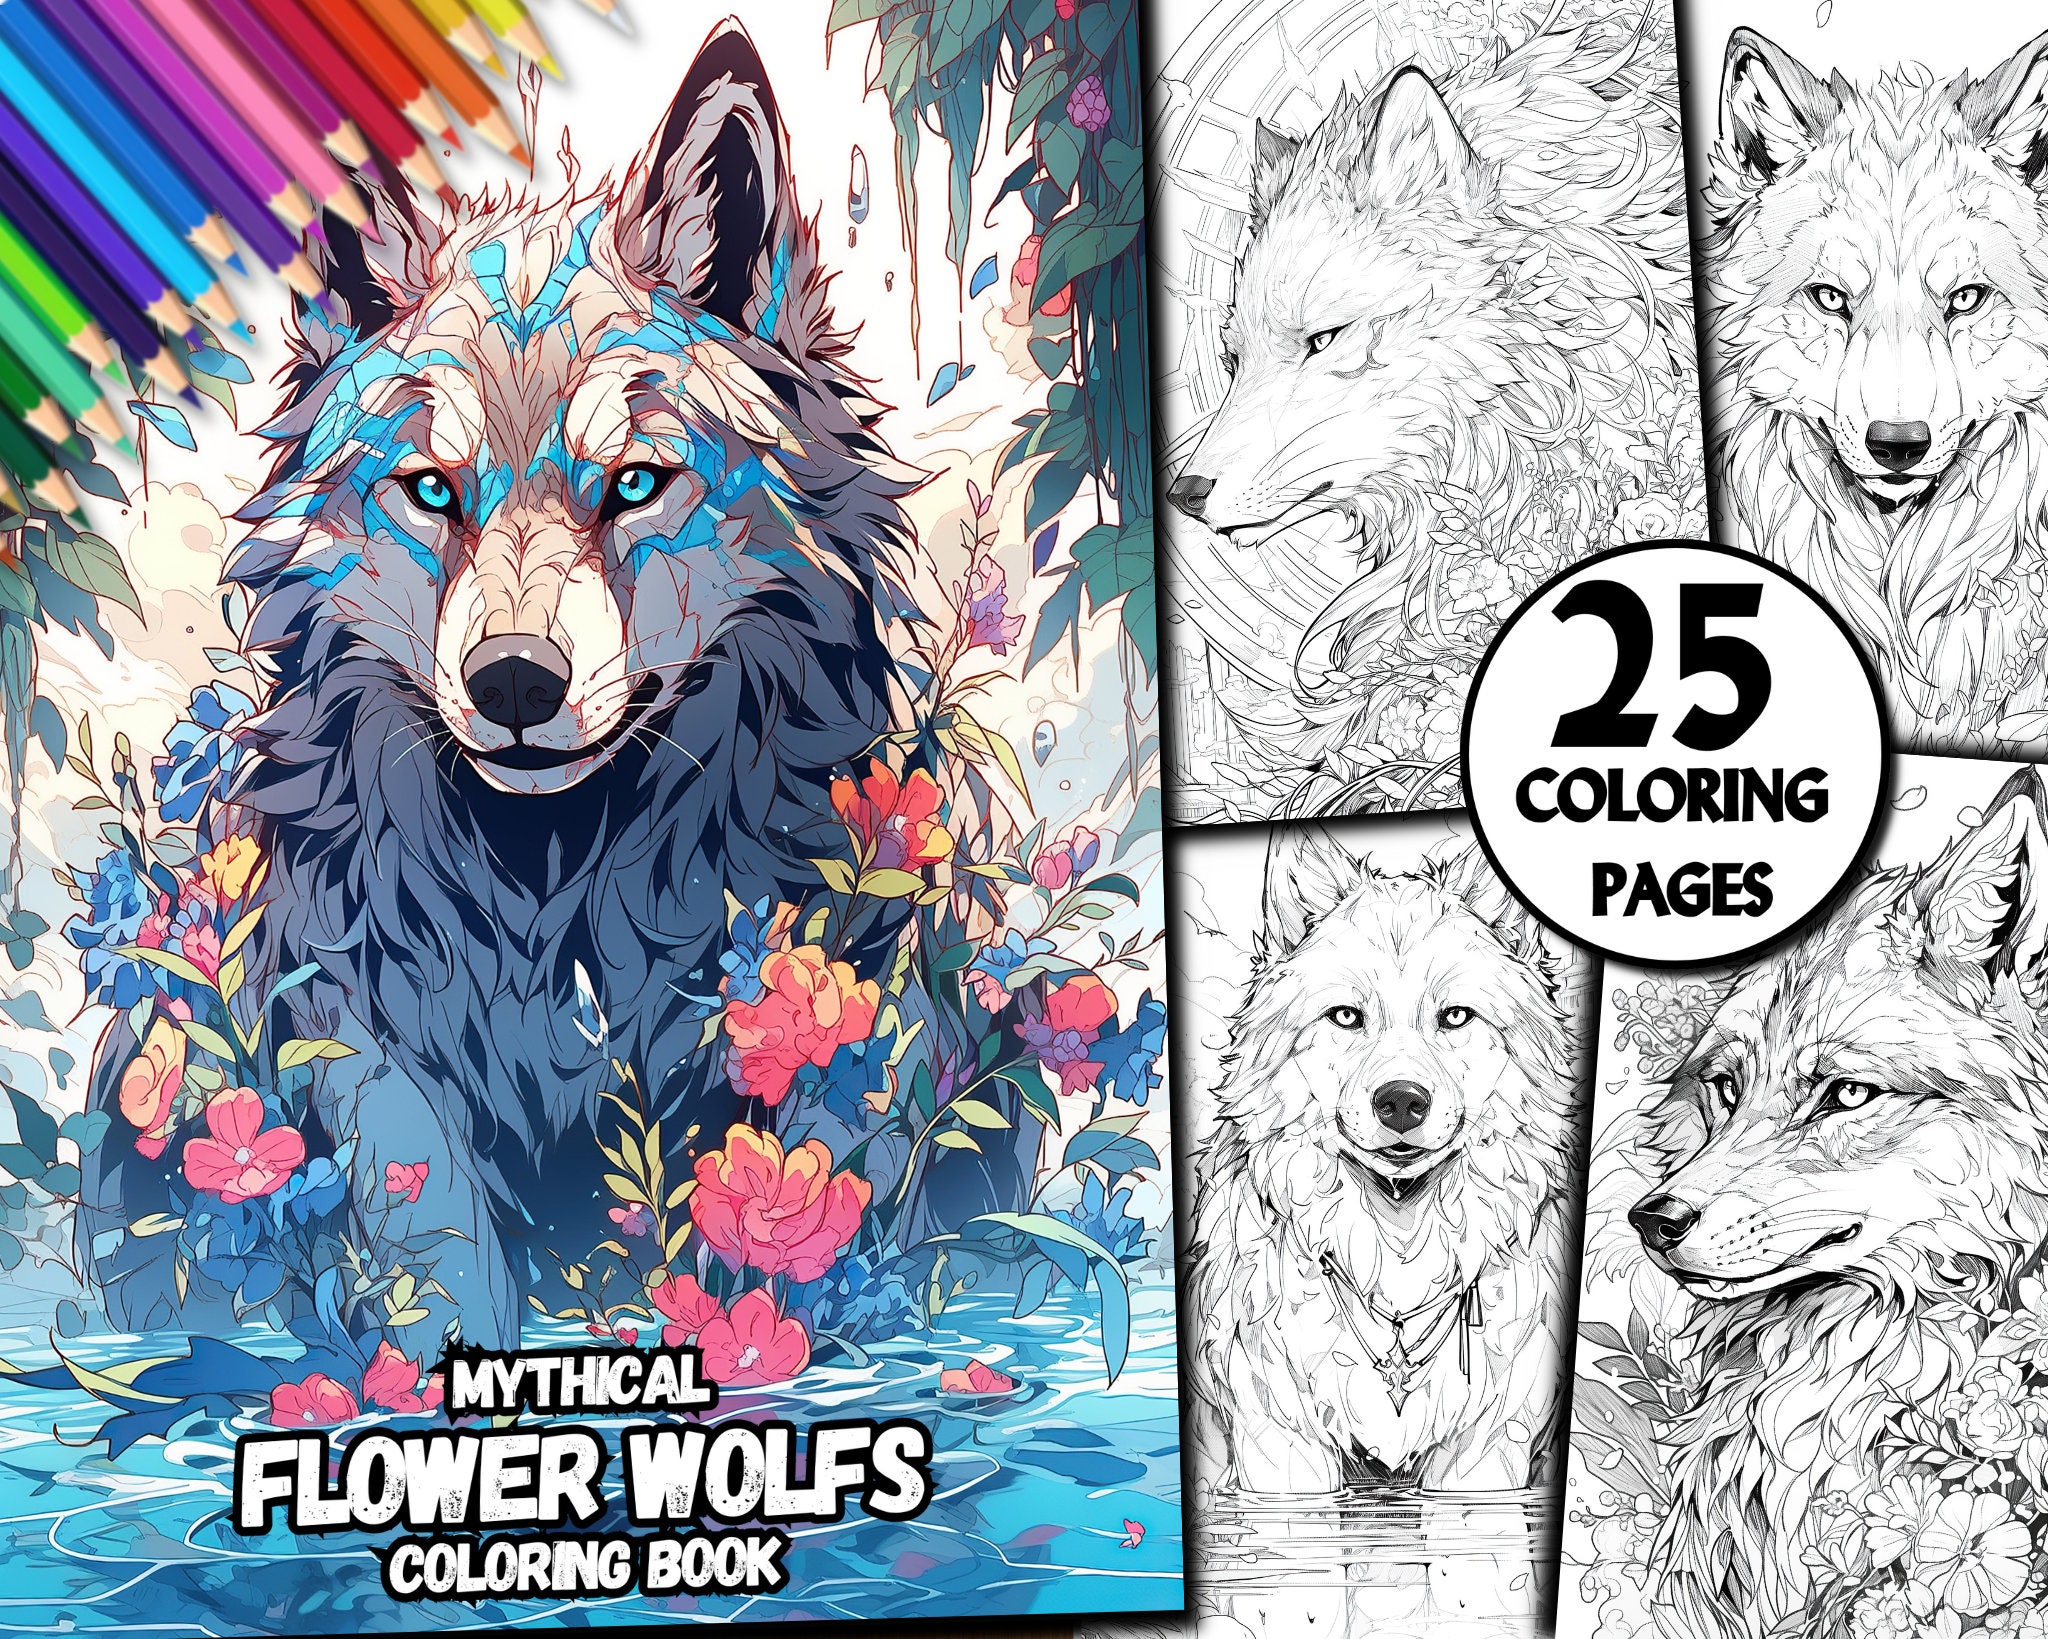 Wolfoo and Lucy Coloring Pages - Free Printable Coloring Pages